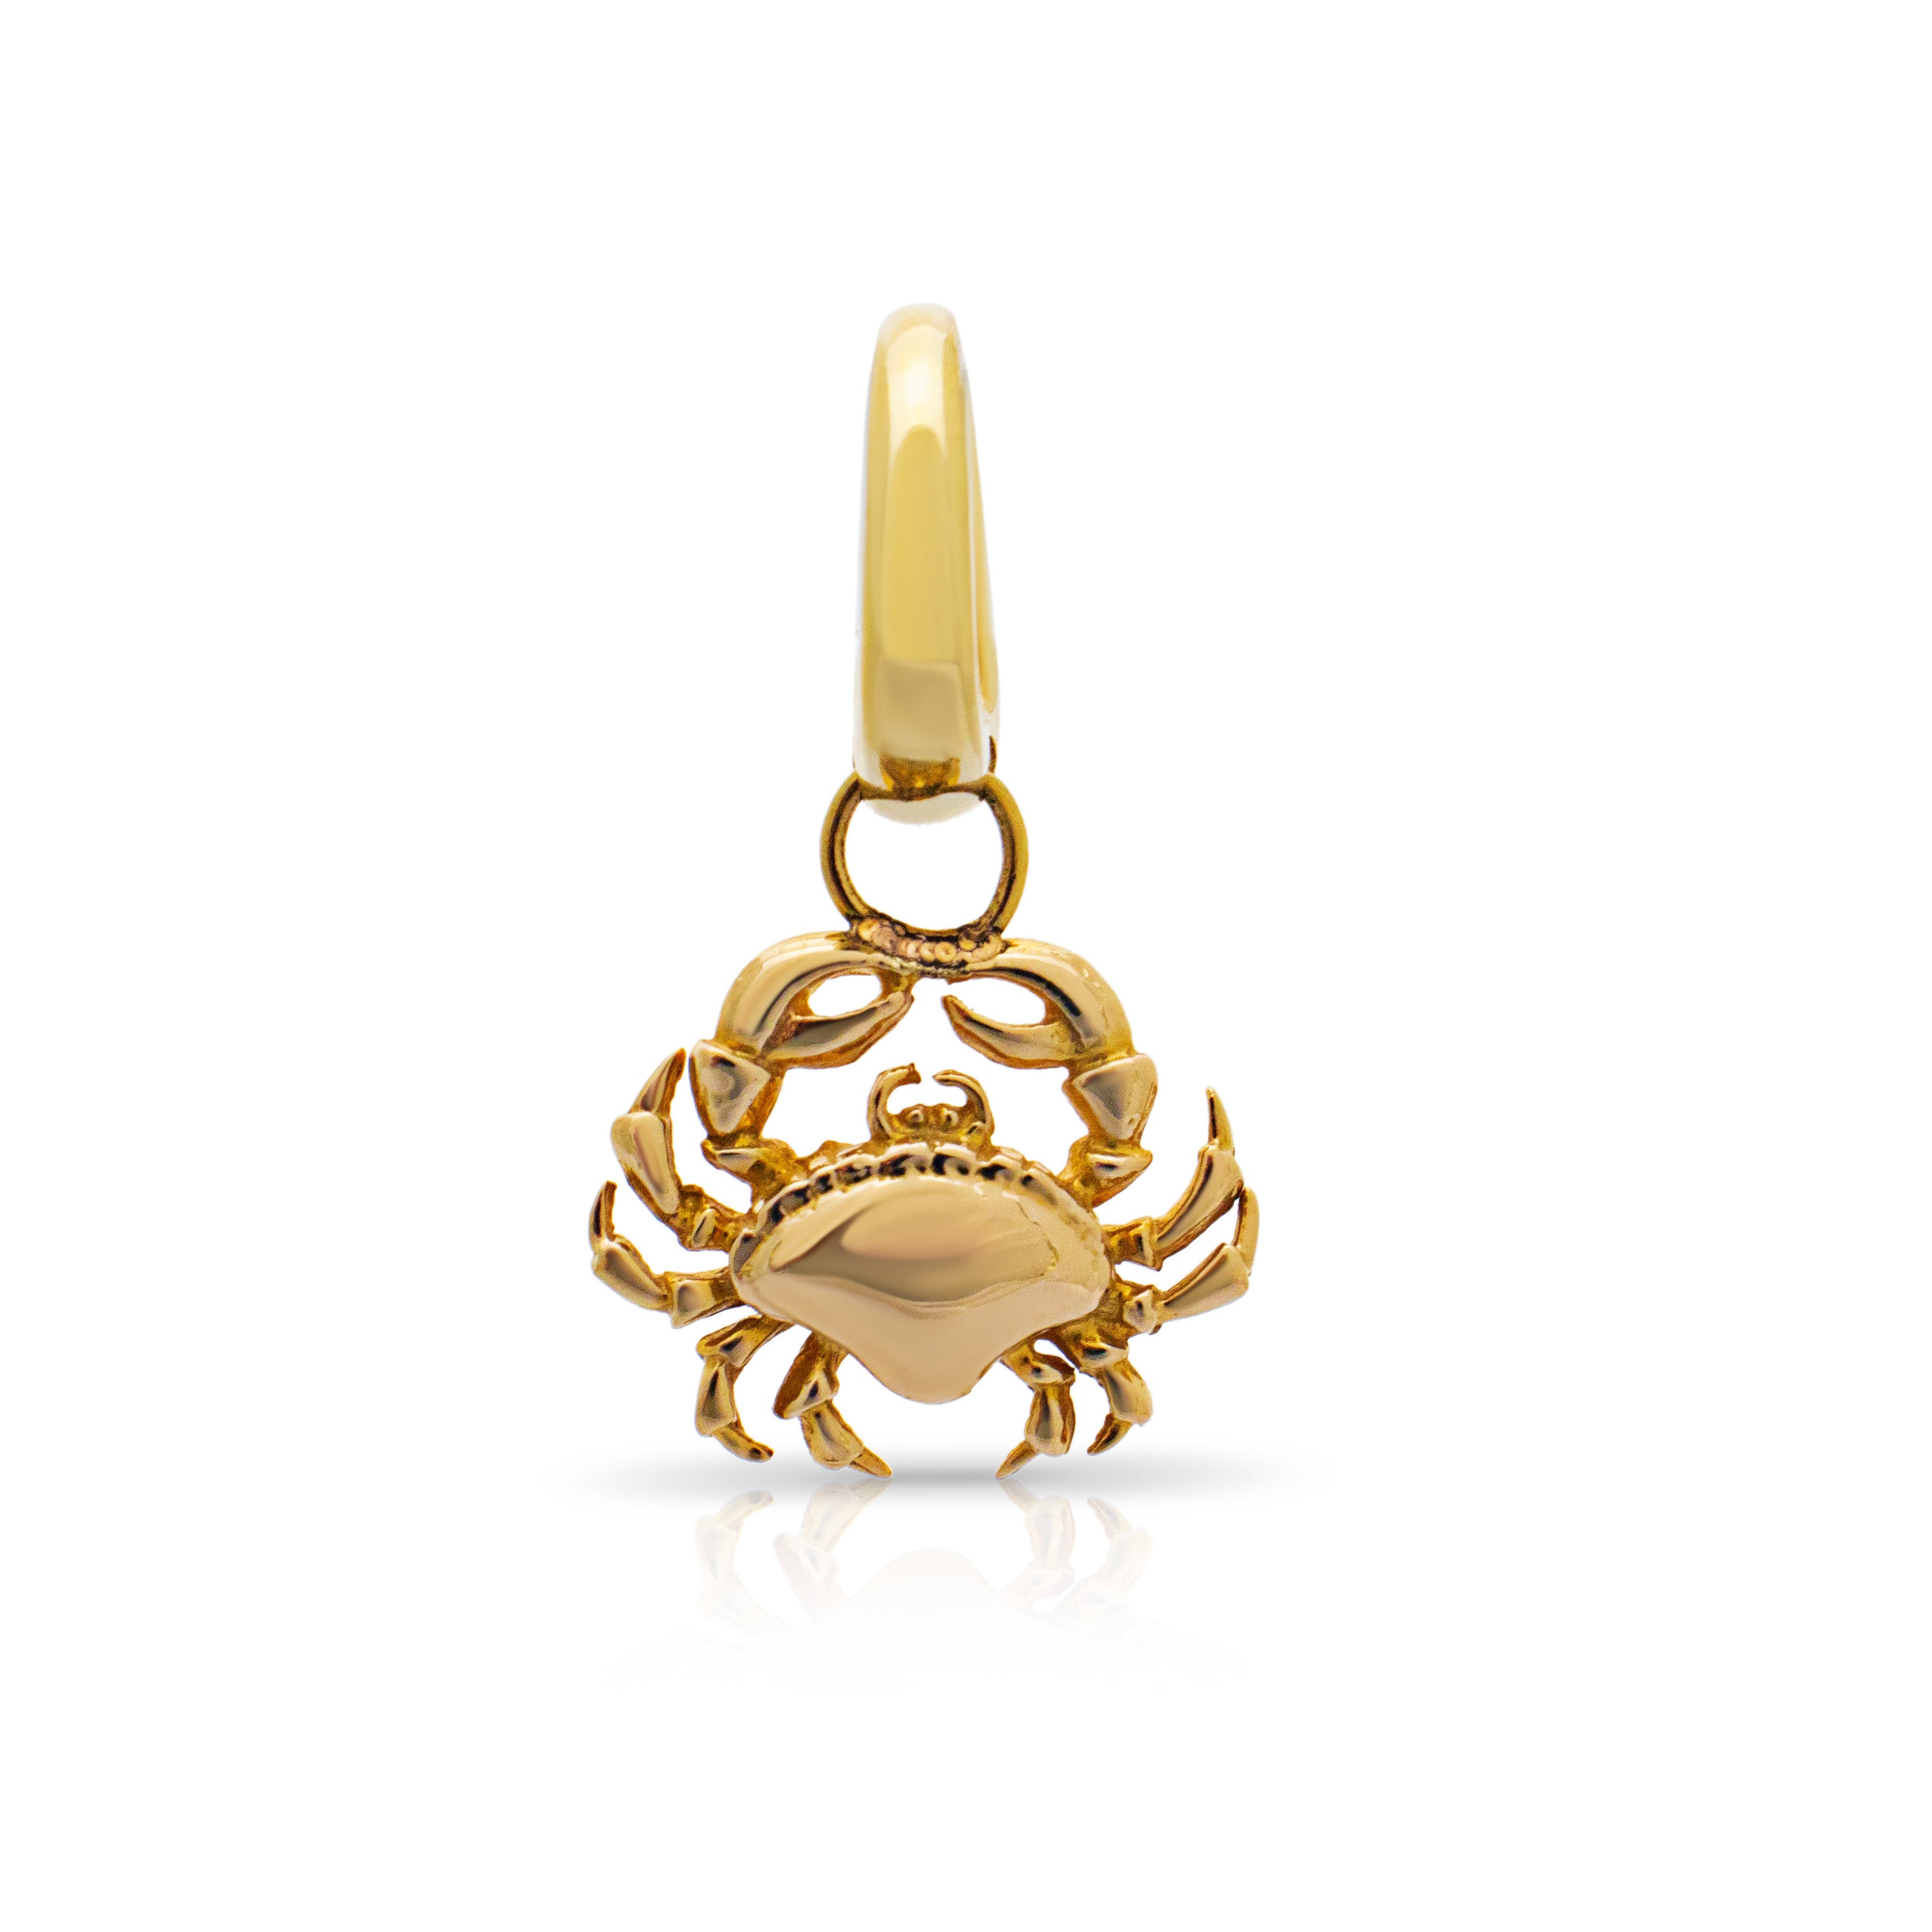 Claude the crab. Crab charm. Crab pendant. Cancer pendant. Solid gold crab. Solid silver crab. Animal charm. Those Happy Places. Serena Ansell Jewellery. Fine Jewellery London. 